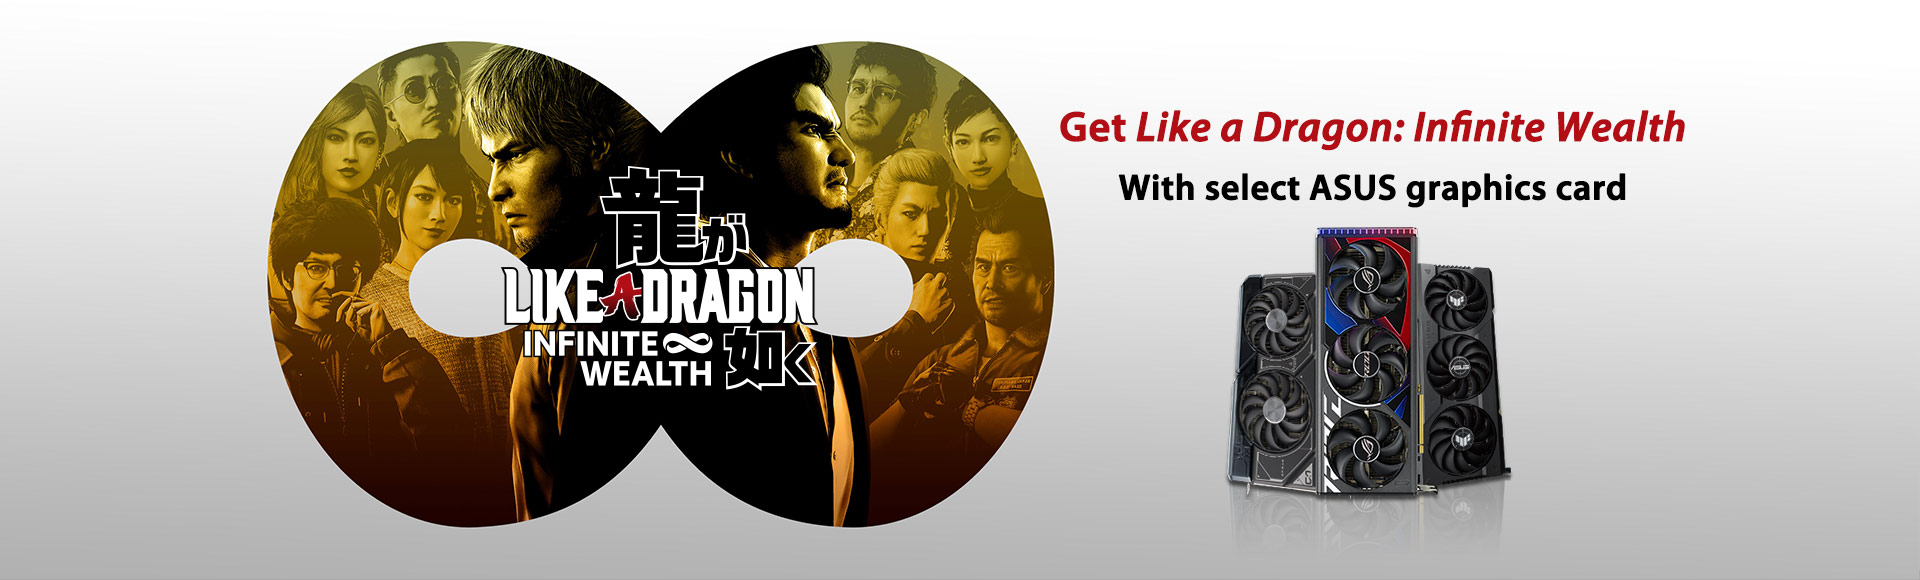 Get Like a Dragon: Infinite Wealth with select ASUS graphics